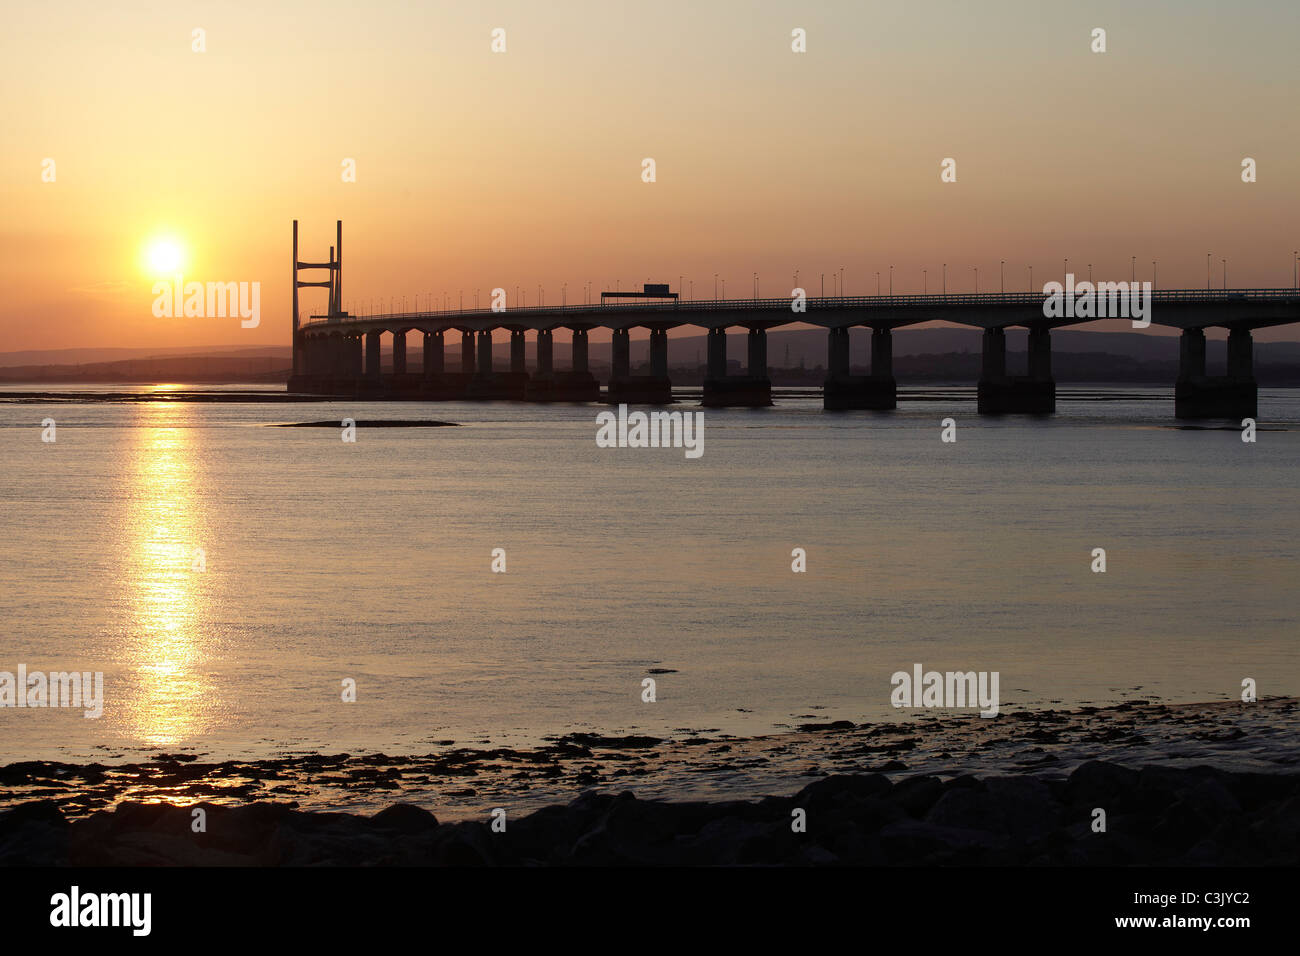 The Second River Severn Bridge Crossing at Dusk. The Bridge connects England to Wales carrying the M4 Motorway. Stock Photo